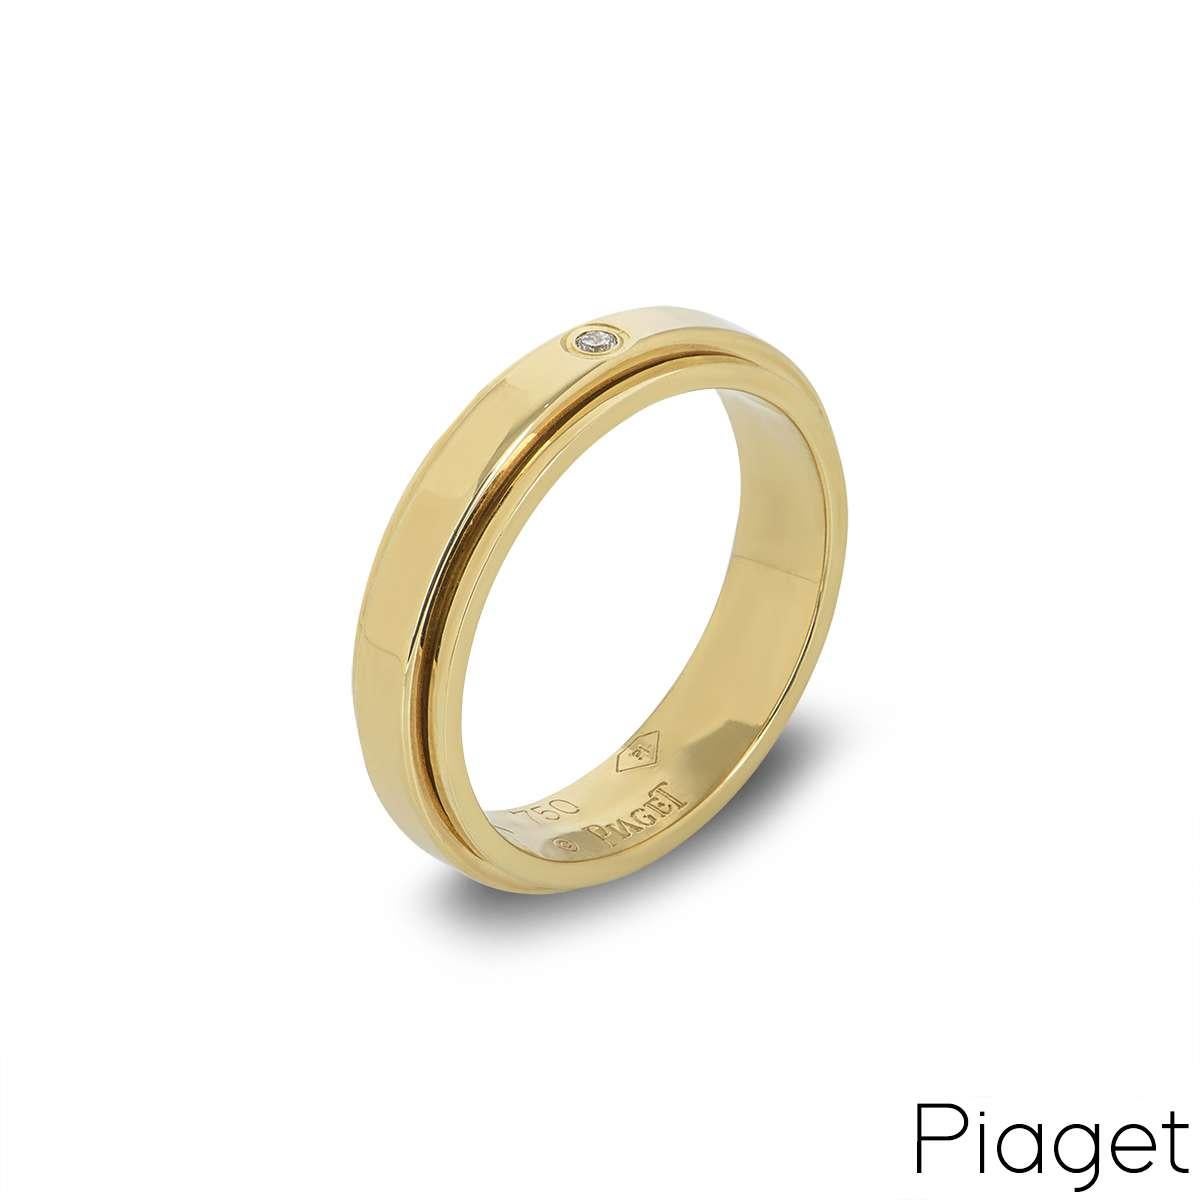 A Piaget Possession ring in 18k yellow gold, set with 1 round brilliant cut diamond. The diamond is set within the inner band, which moves freely in perpetual movement. The diamond is .14 carat and the band width is approximately 5.00mm and has a